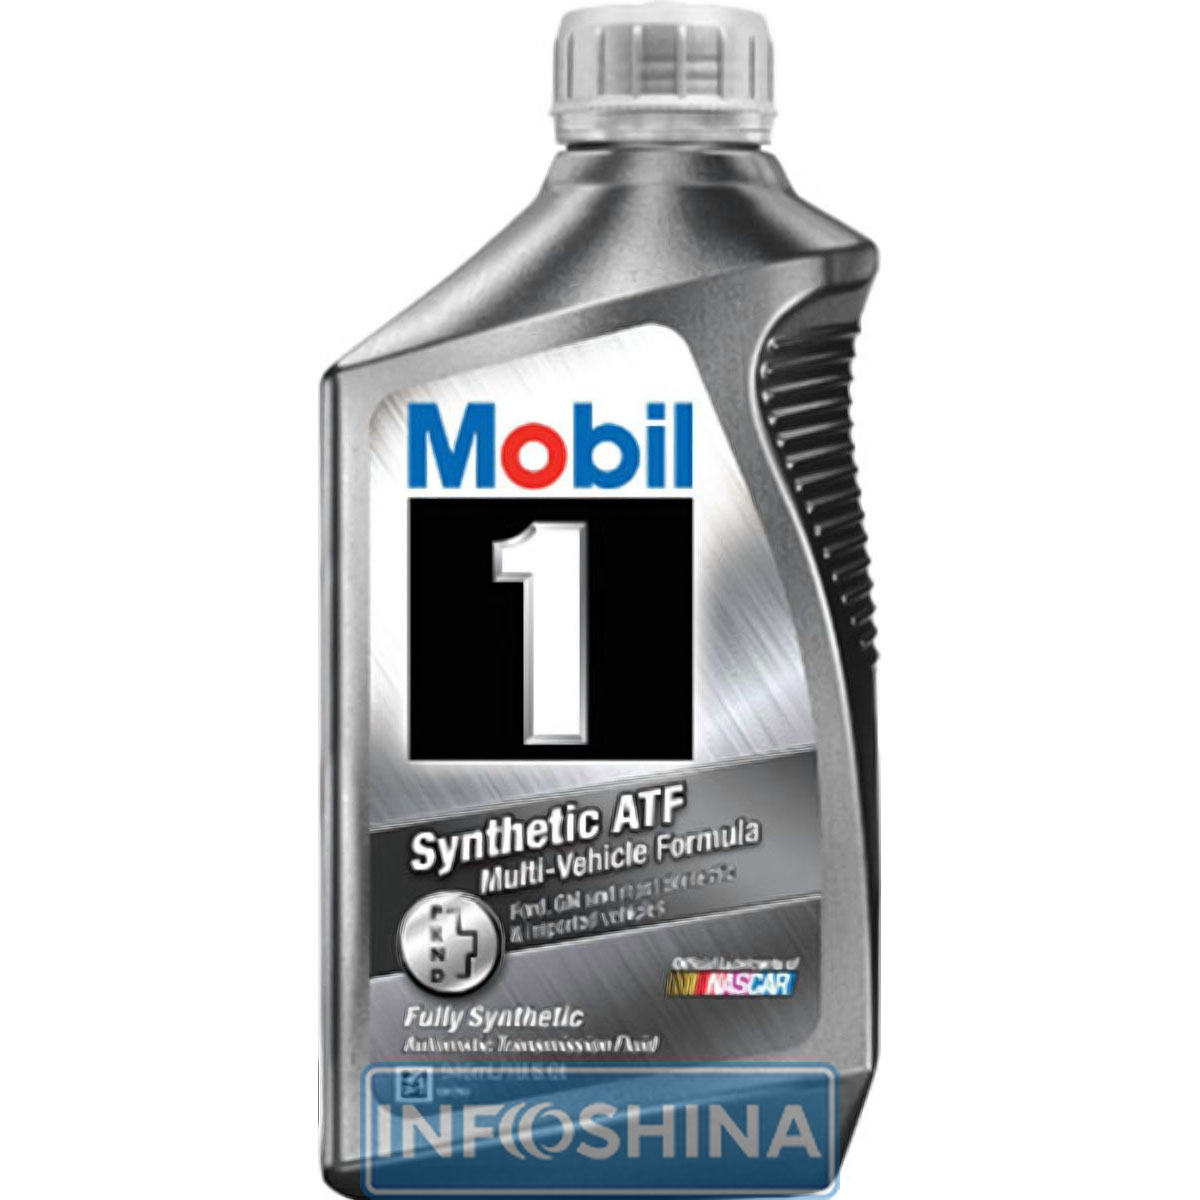 Купити масло Mobil 1 Synthetic ATF